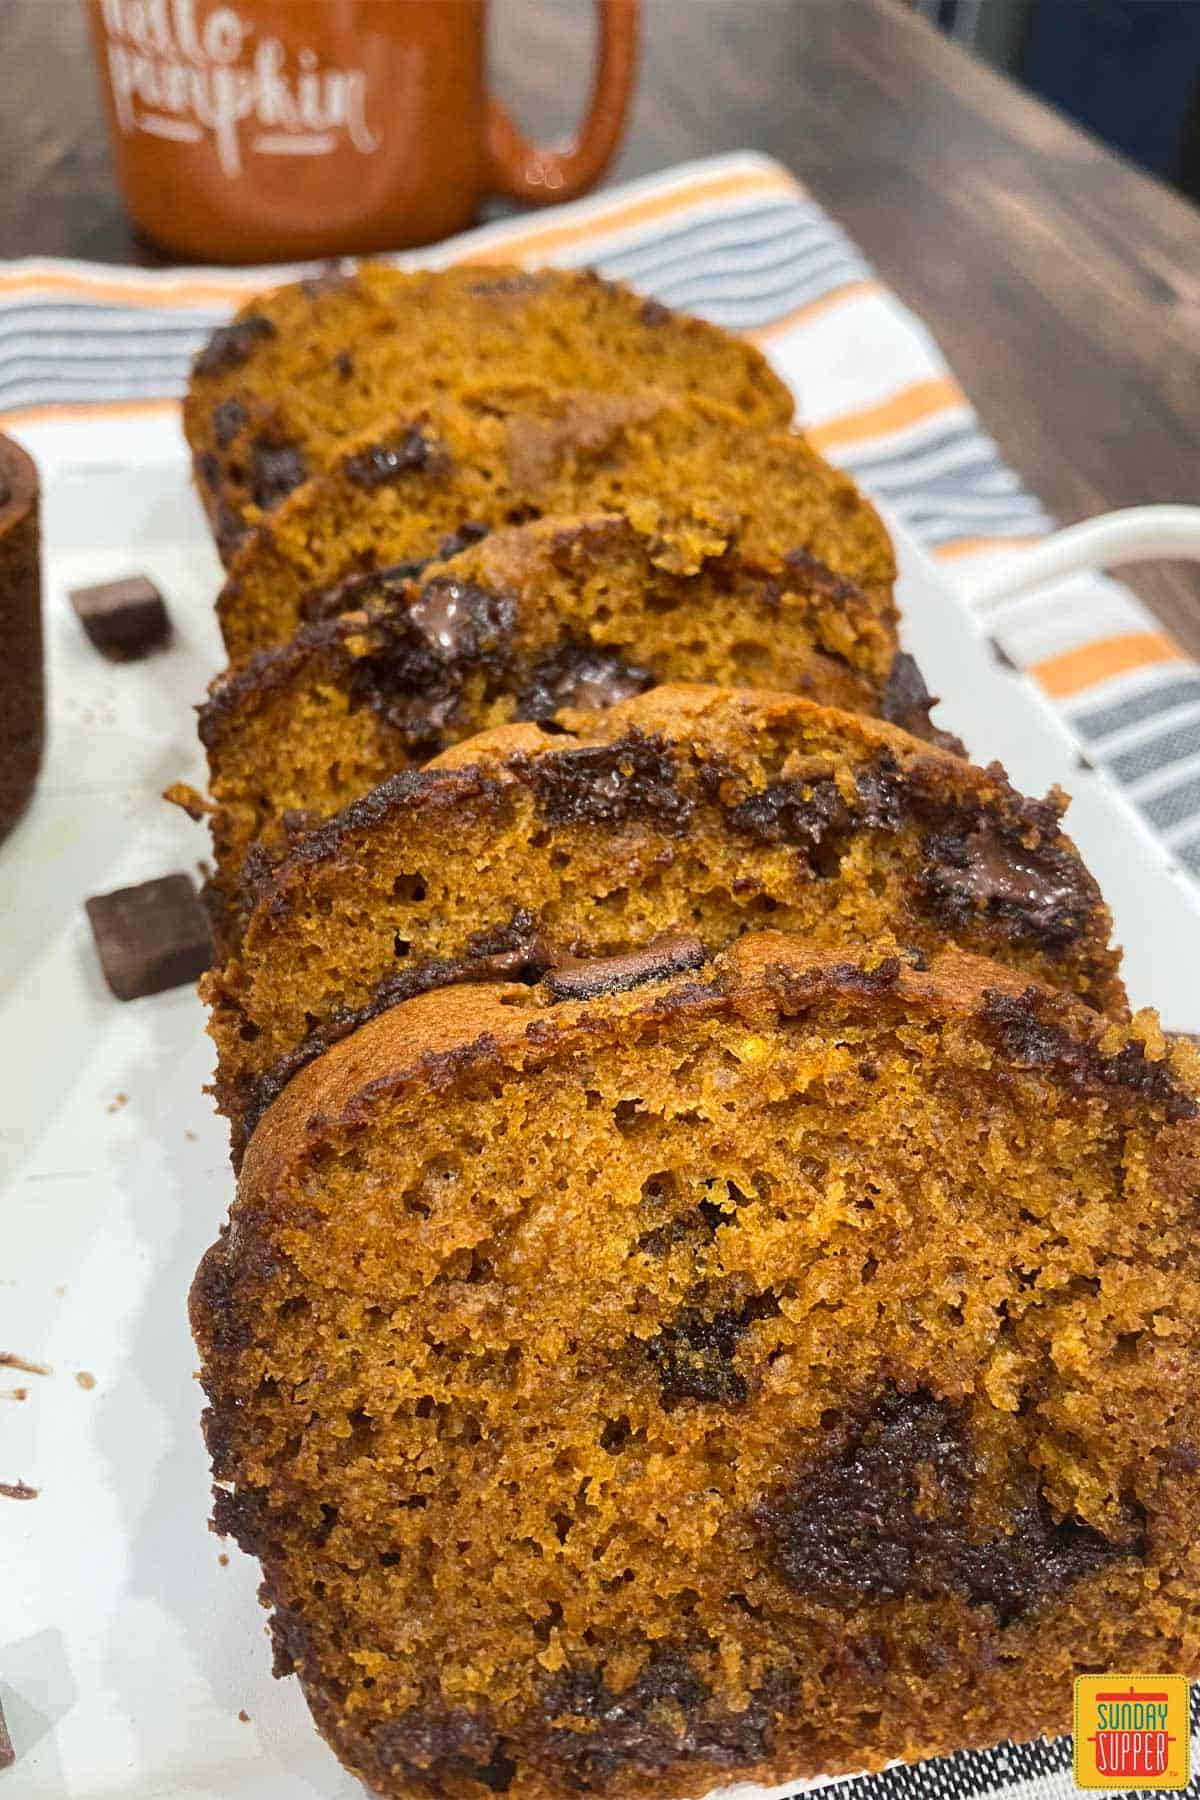 Slices of instant pot pumpkin bread with chocolate chips up close